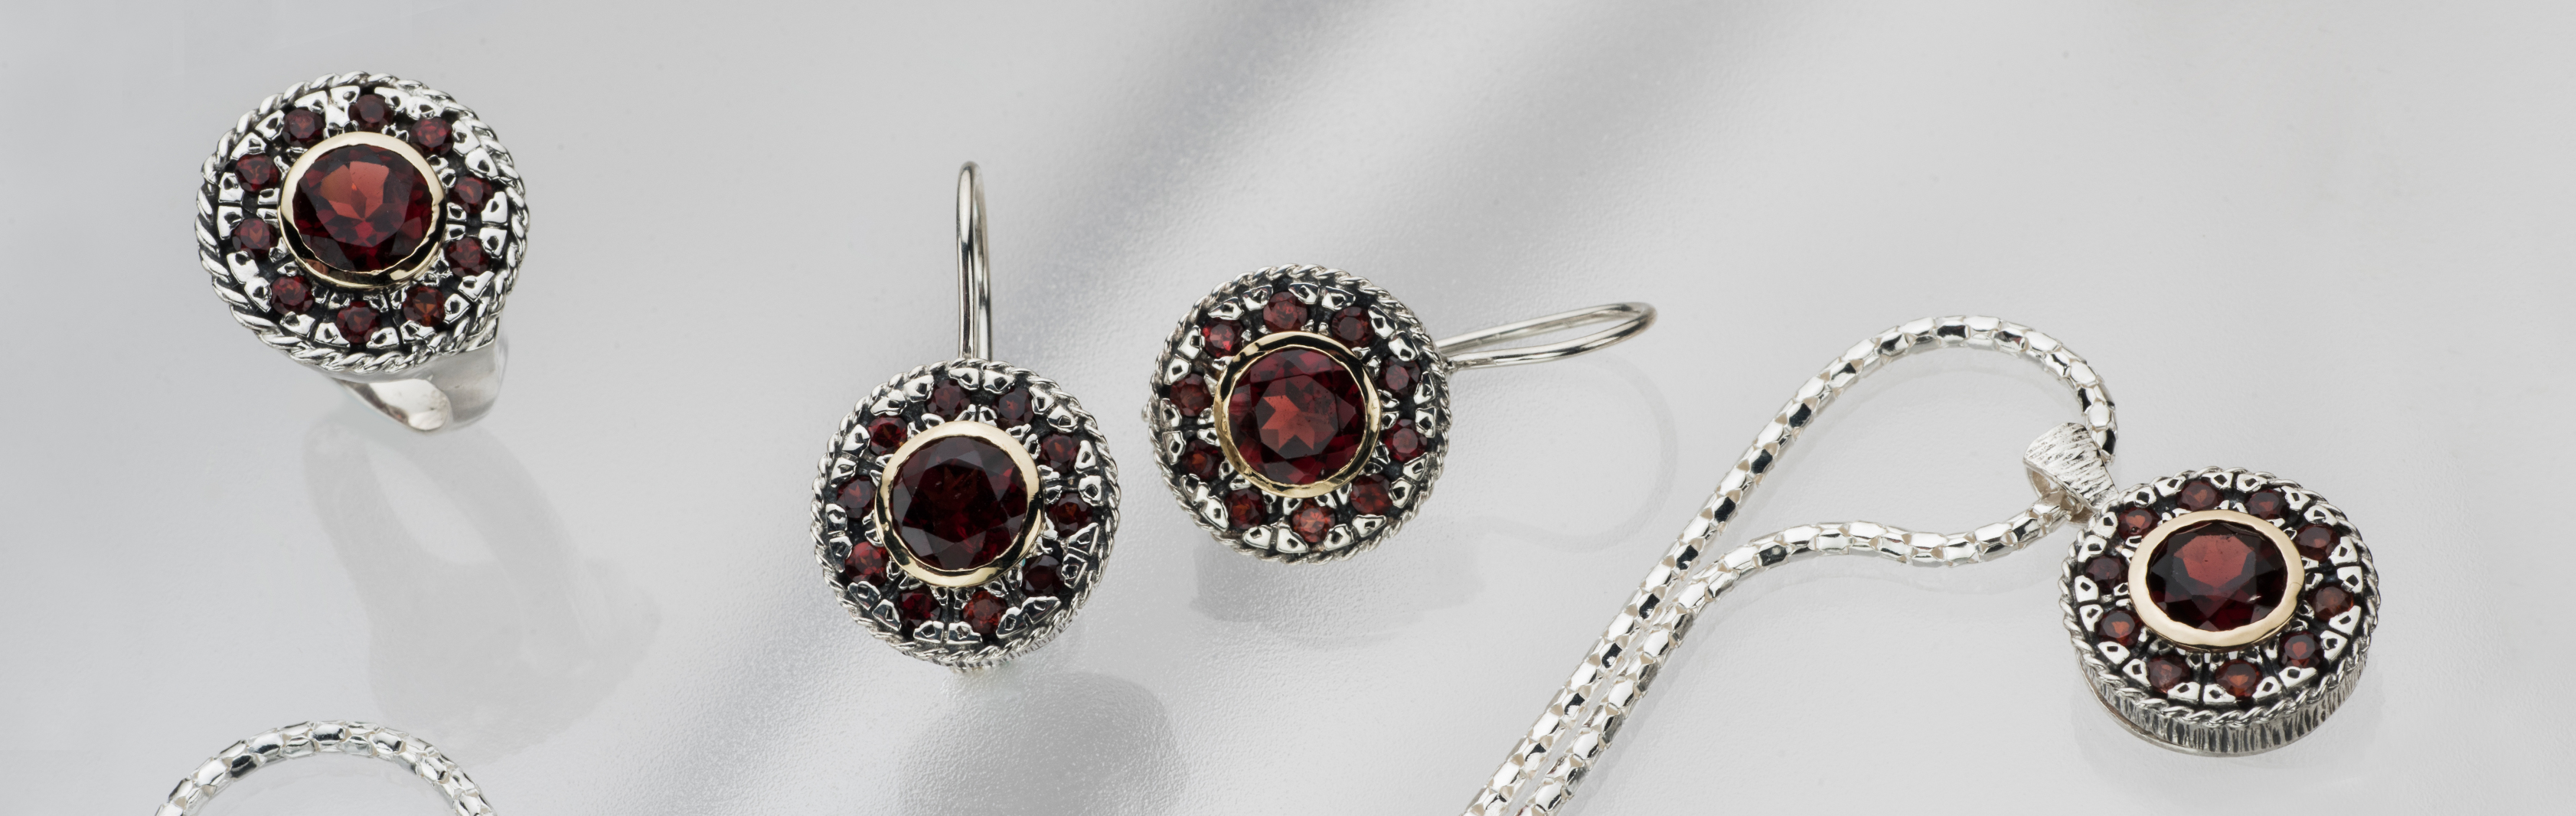 Twilight Collection | 925 Sterling Silver & 9K Gold Jewelry with Garnet